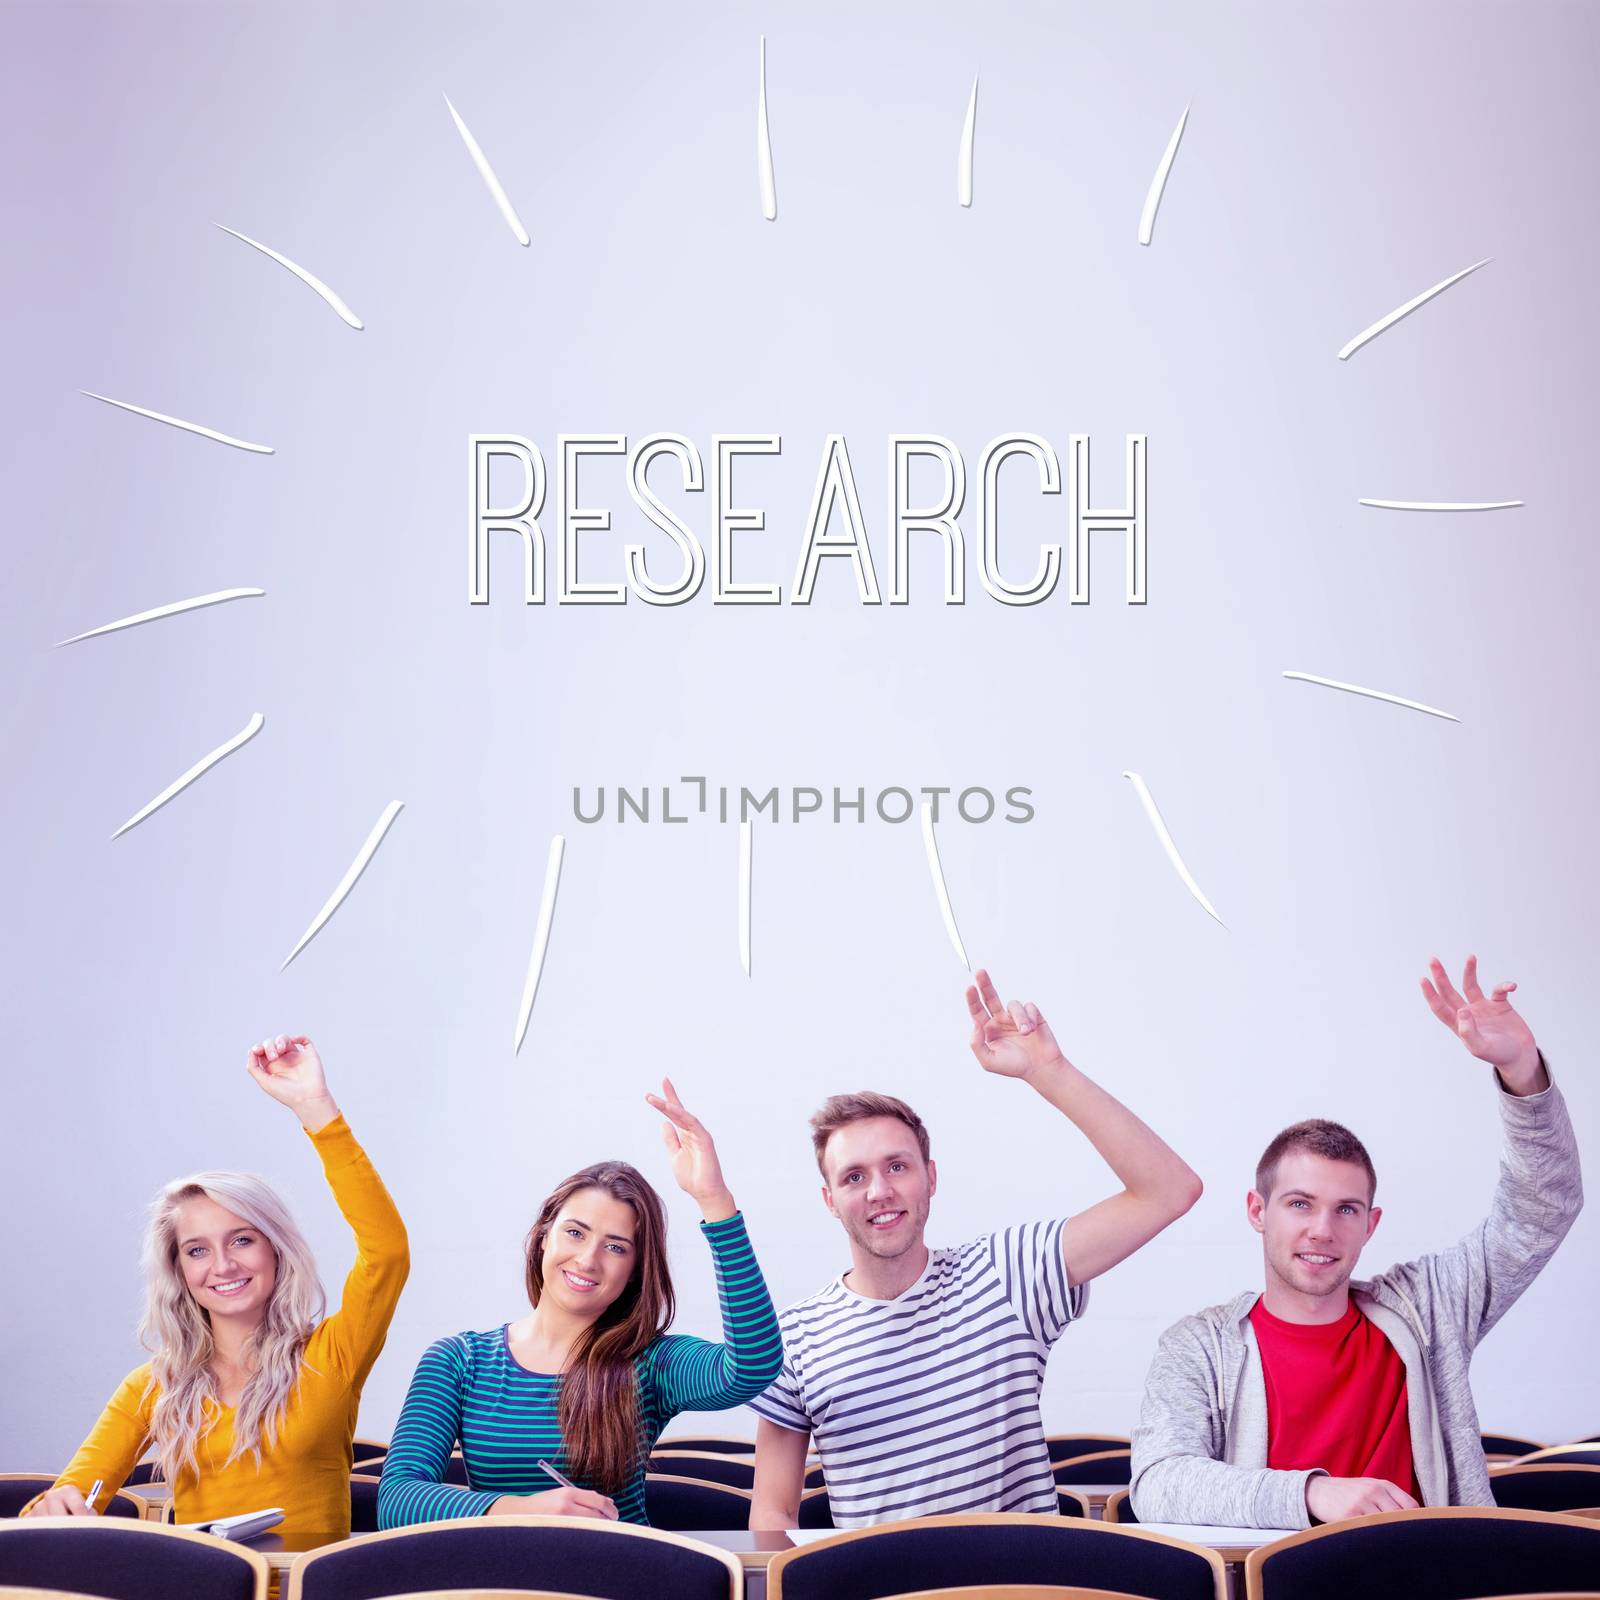 The word research against college students raising hands in the classroom